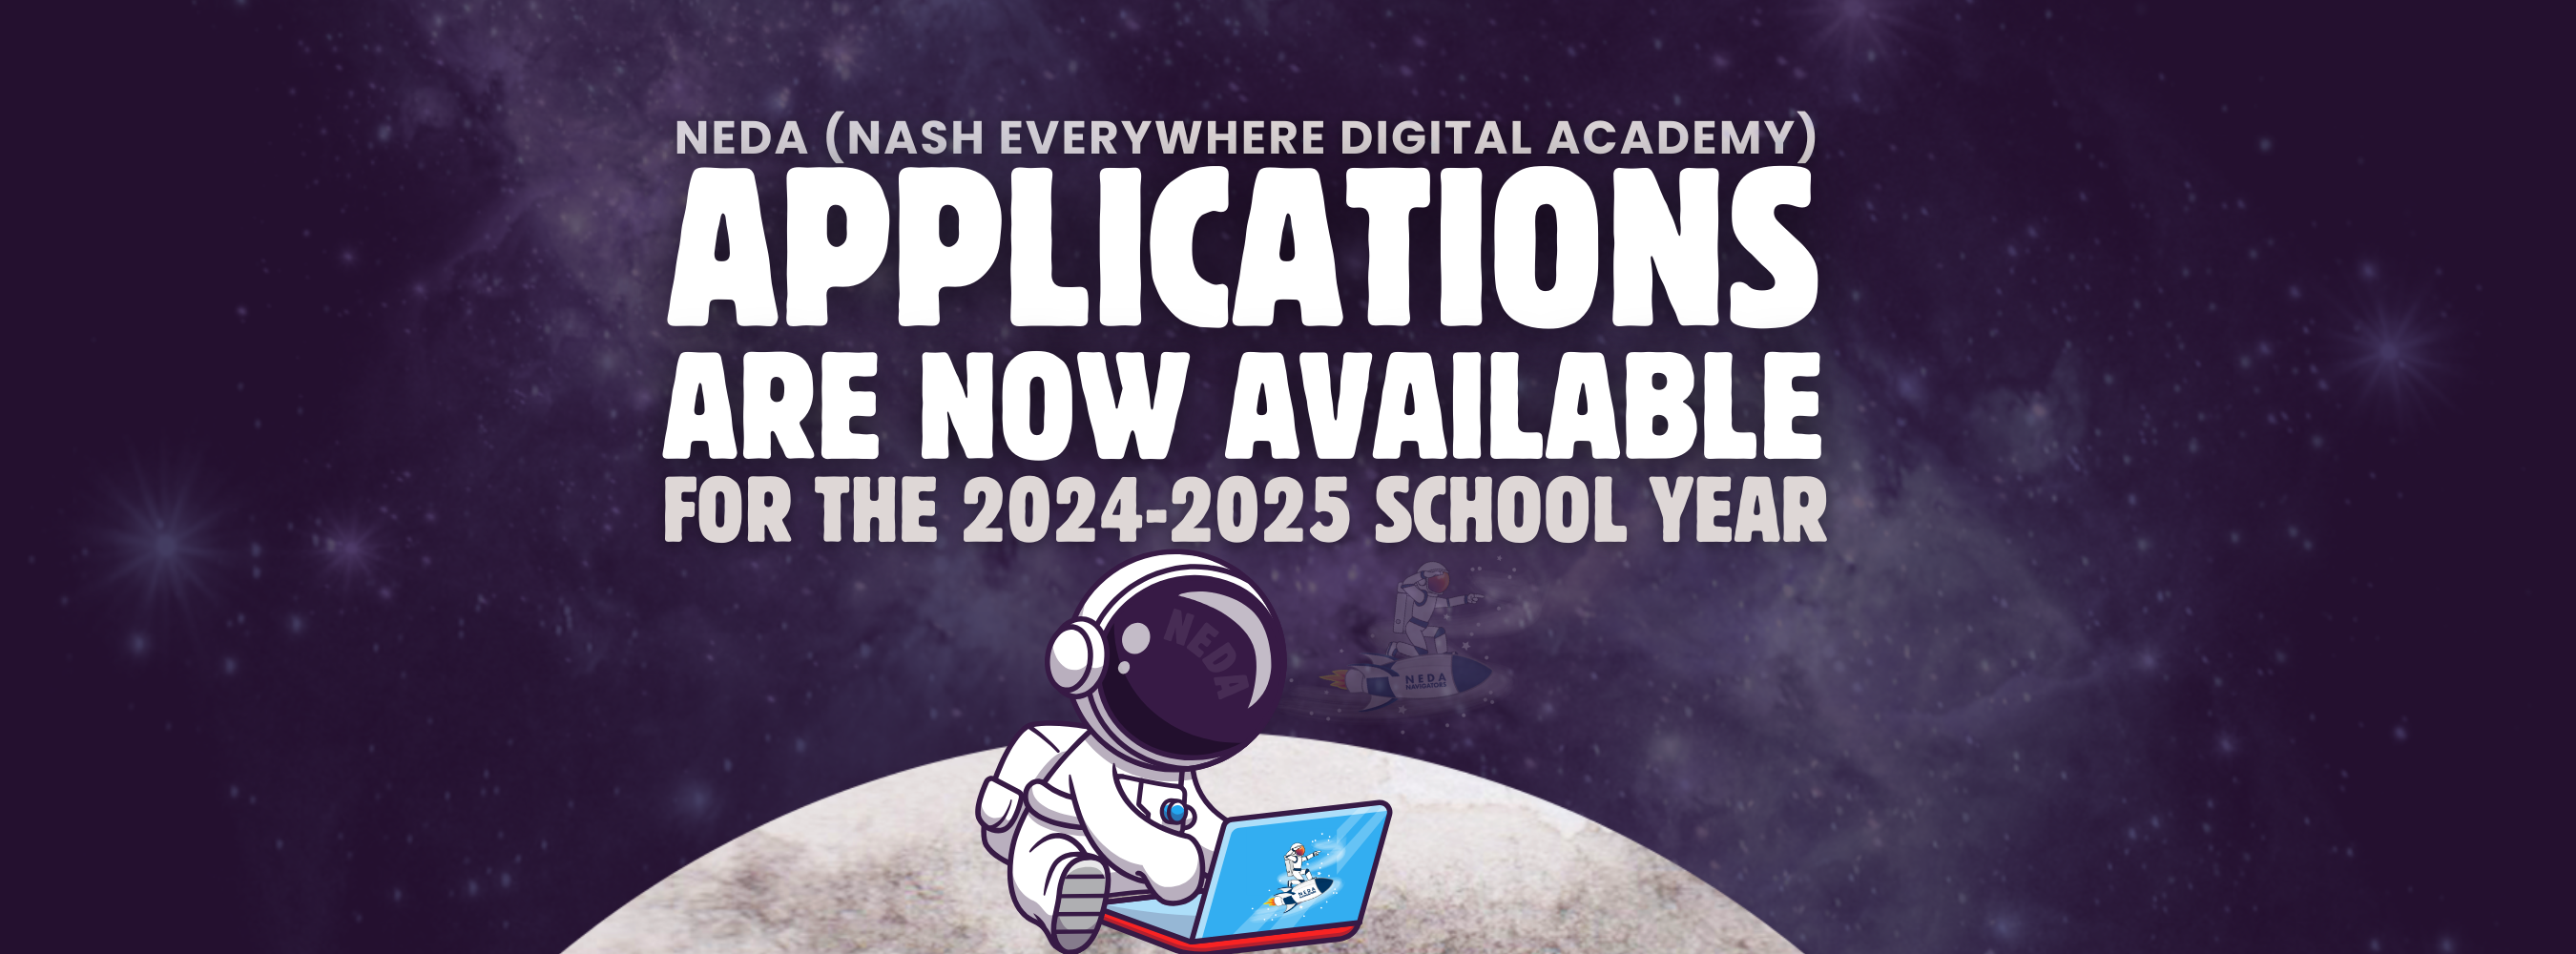 NEDA (Nash Everywhere Digital Academy) Applications are Now Available for the 2024-2025 school year